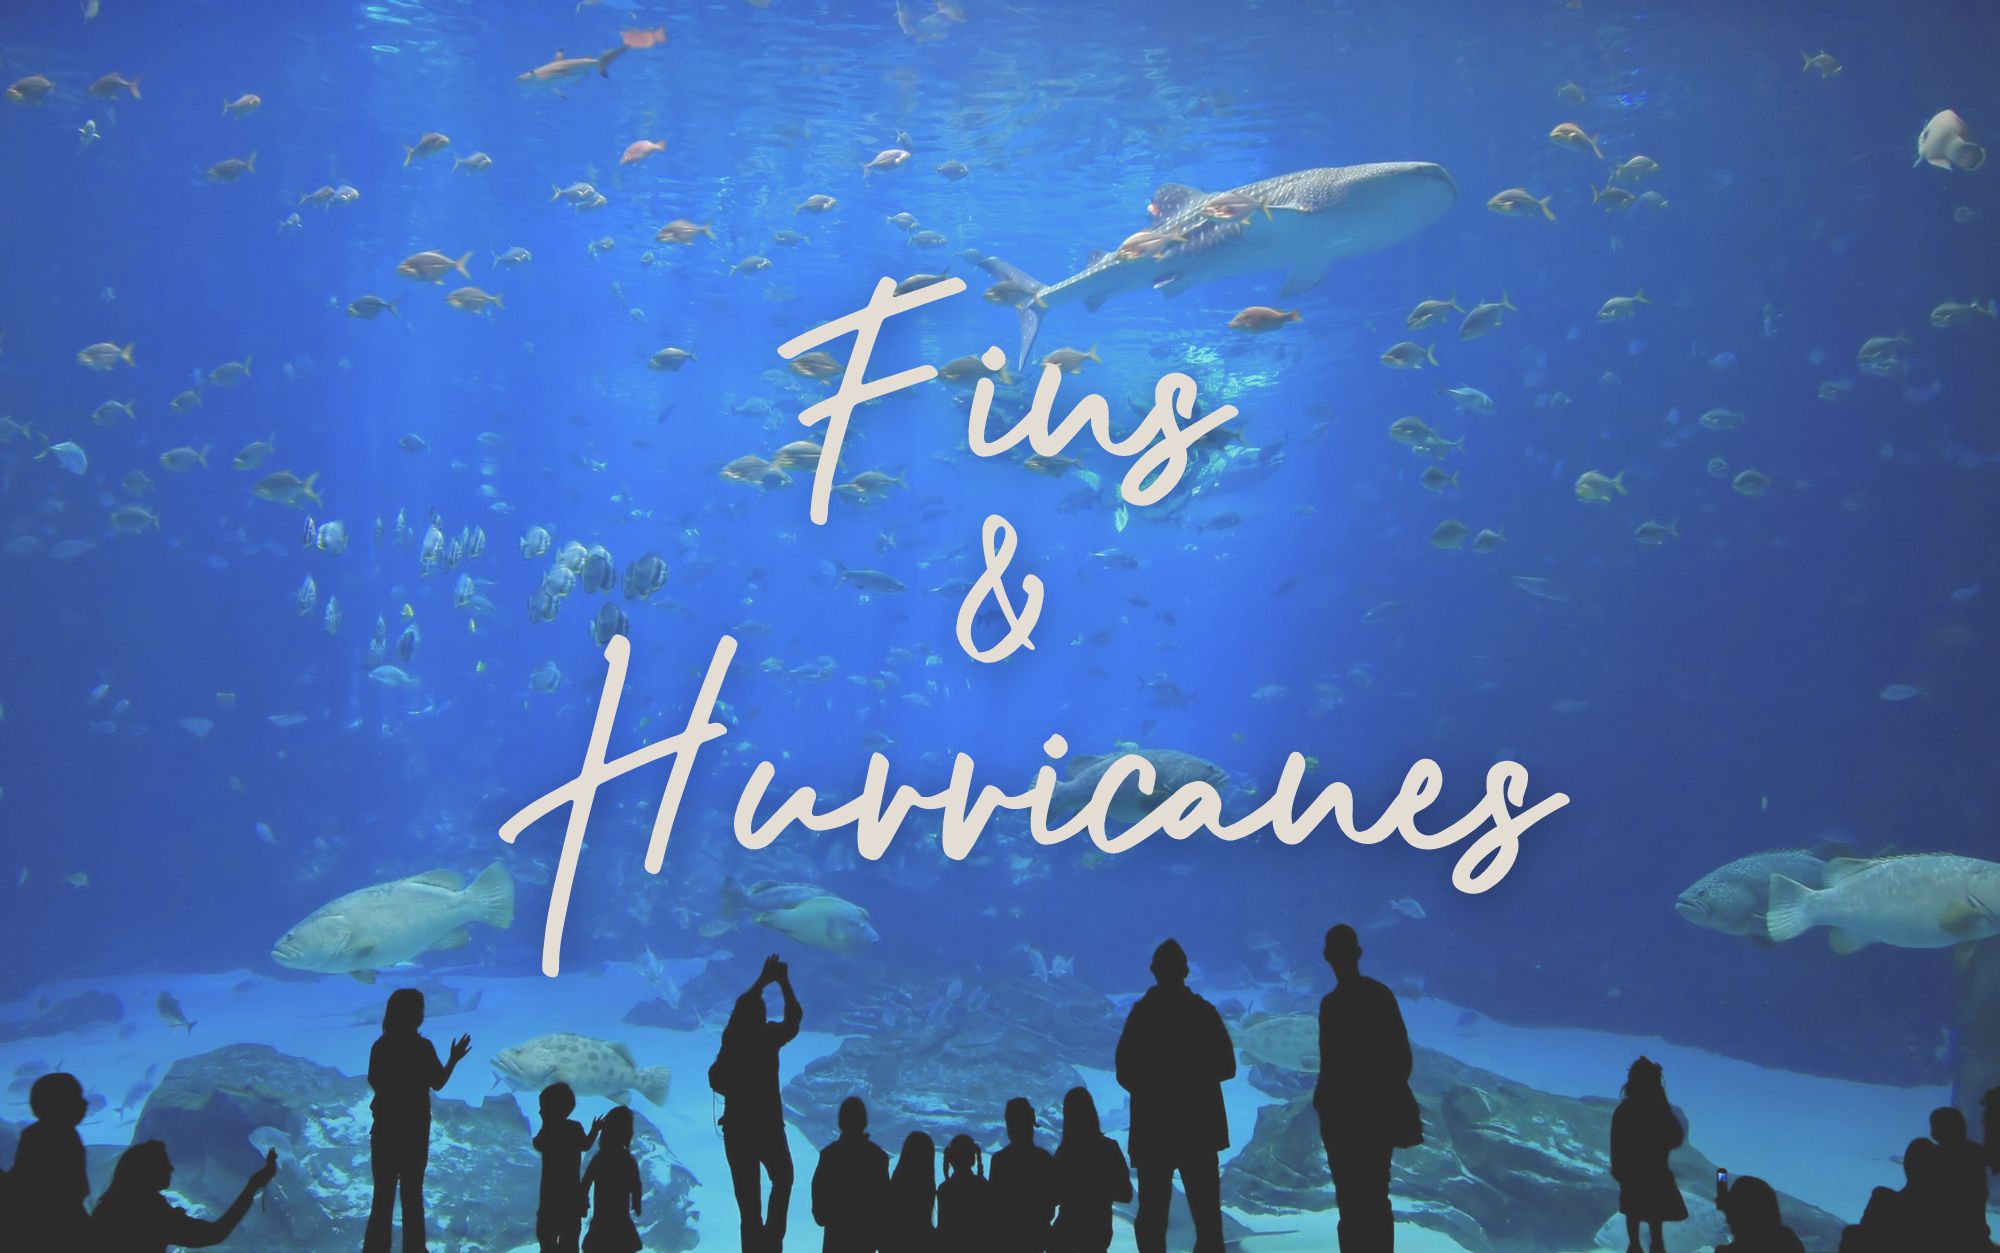 An image attempting to show that we have <b>Fins & Hurricanes | $350</b>